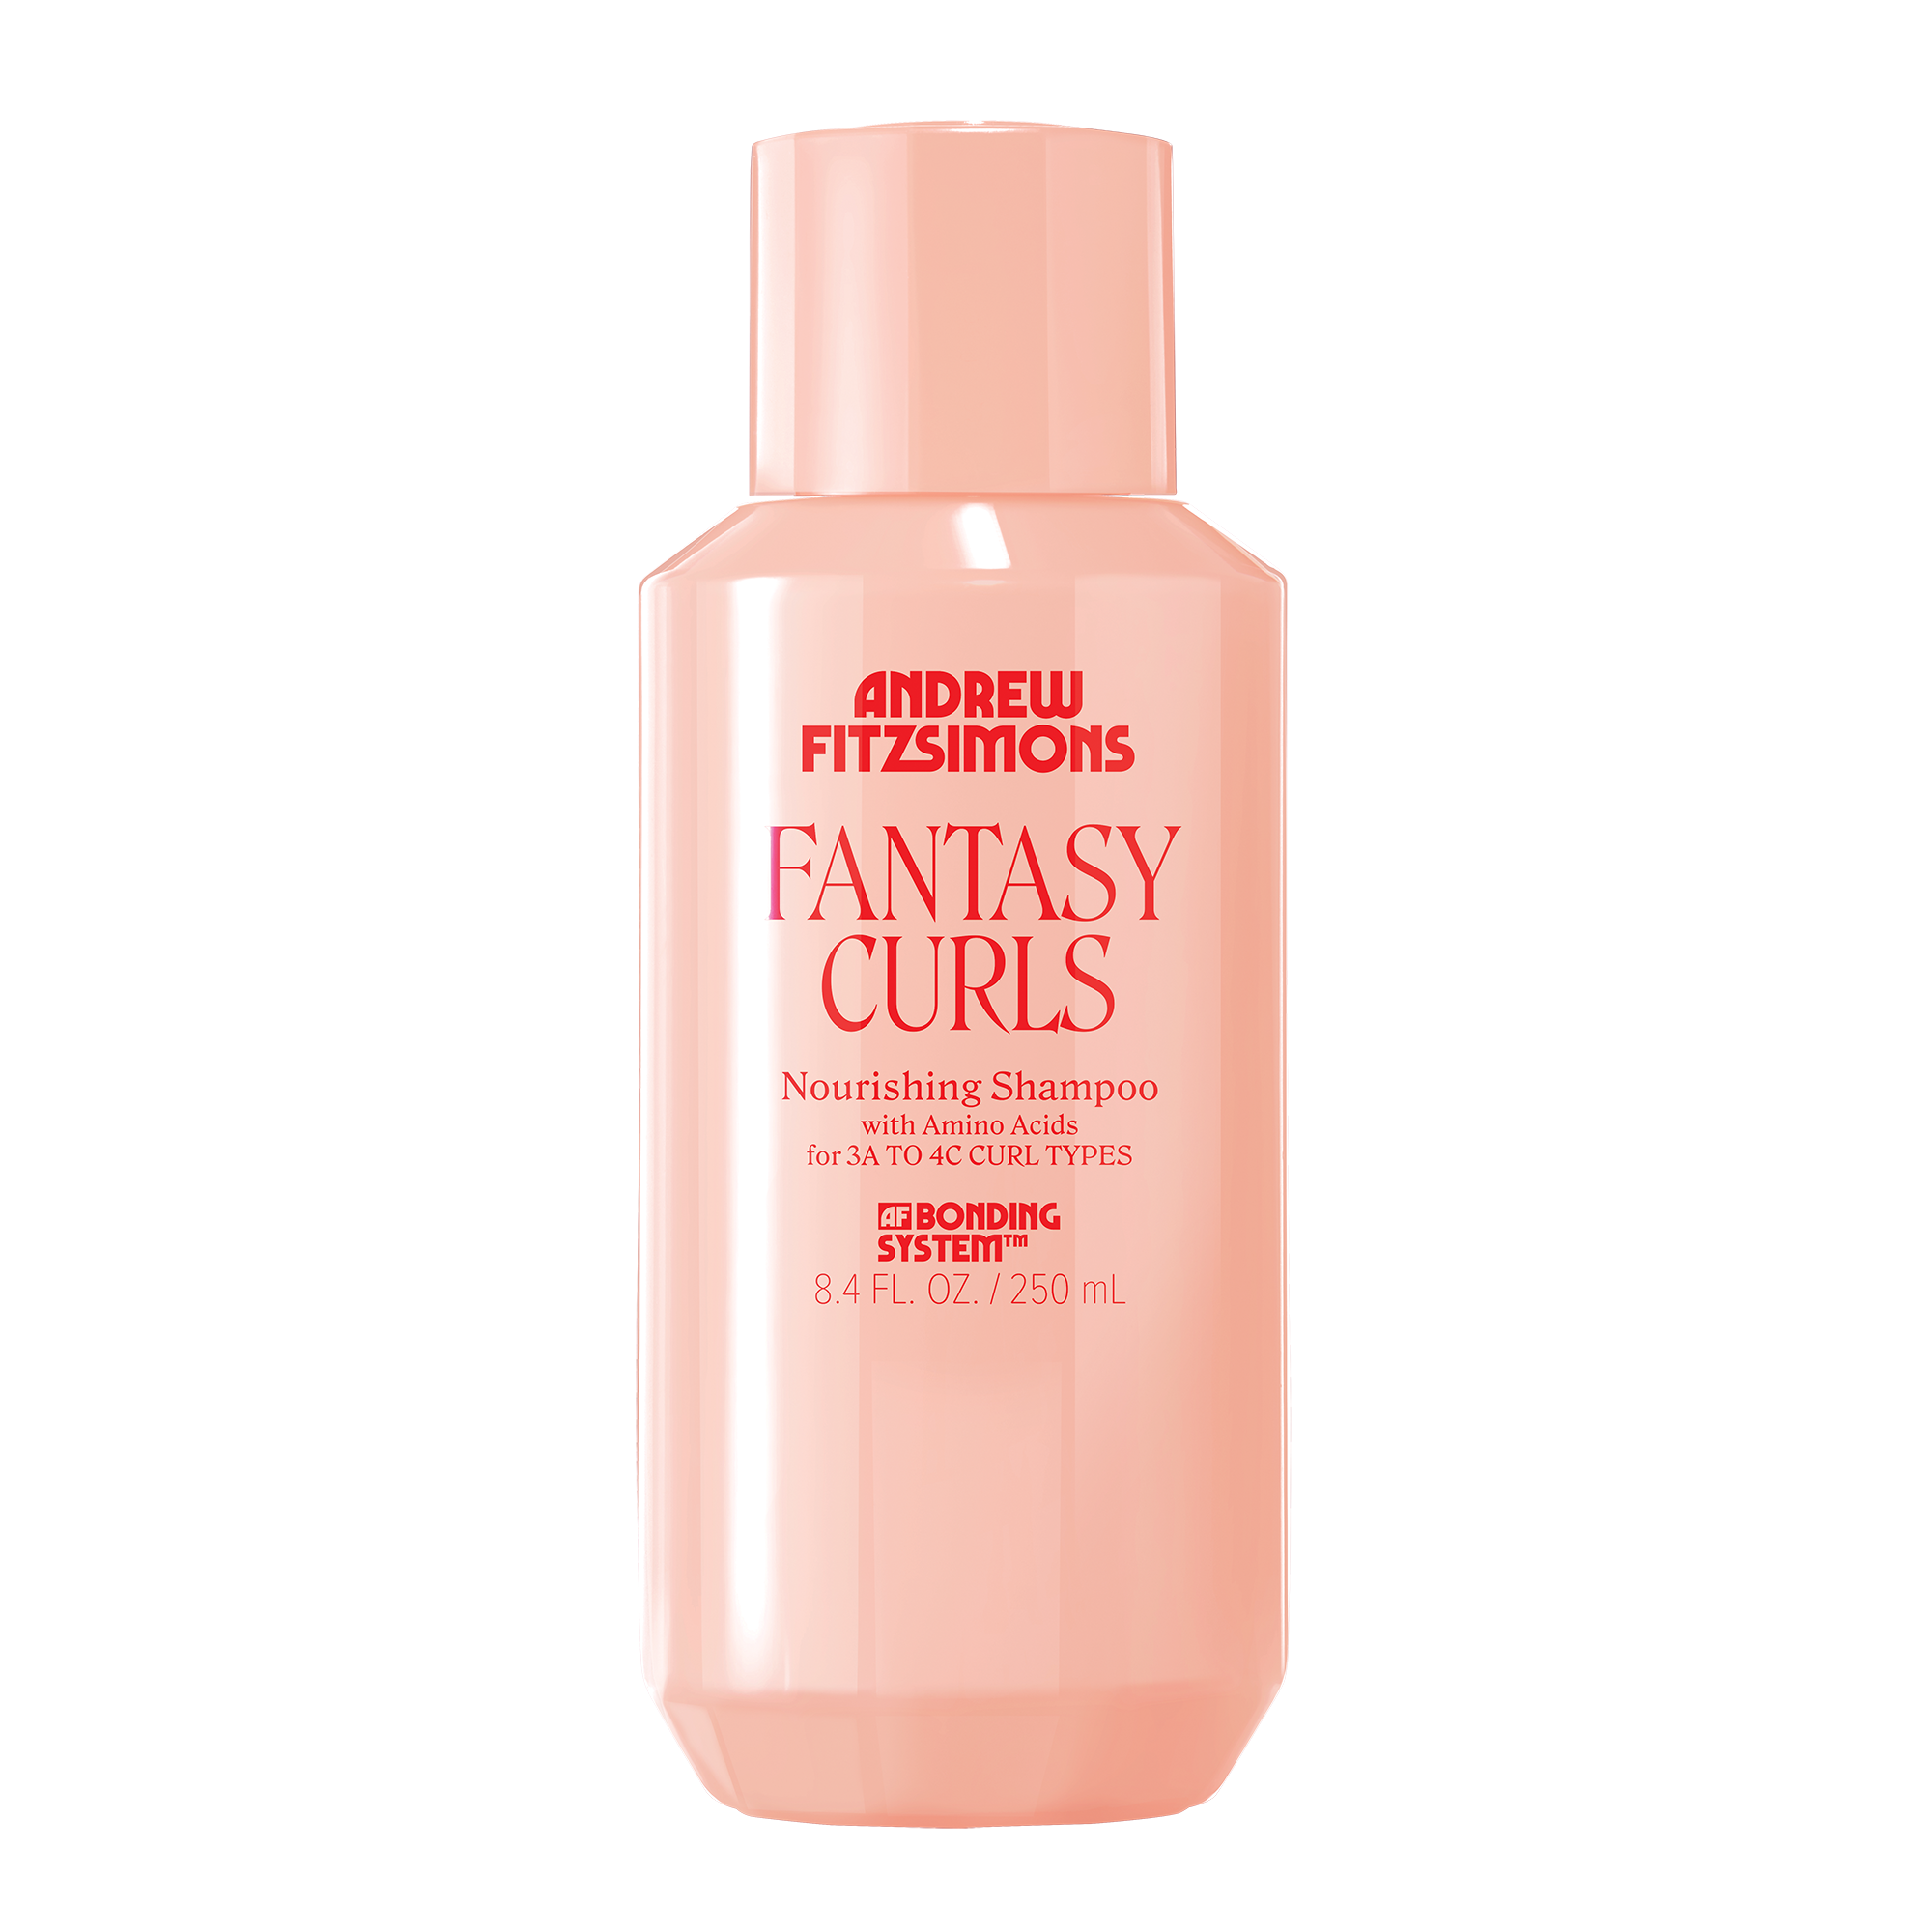 FANTASY CURLS Nourishing Shampoo for Curly Hair with Coconut Oil